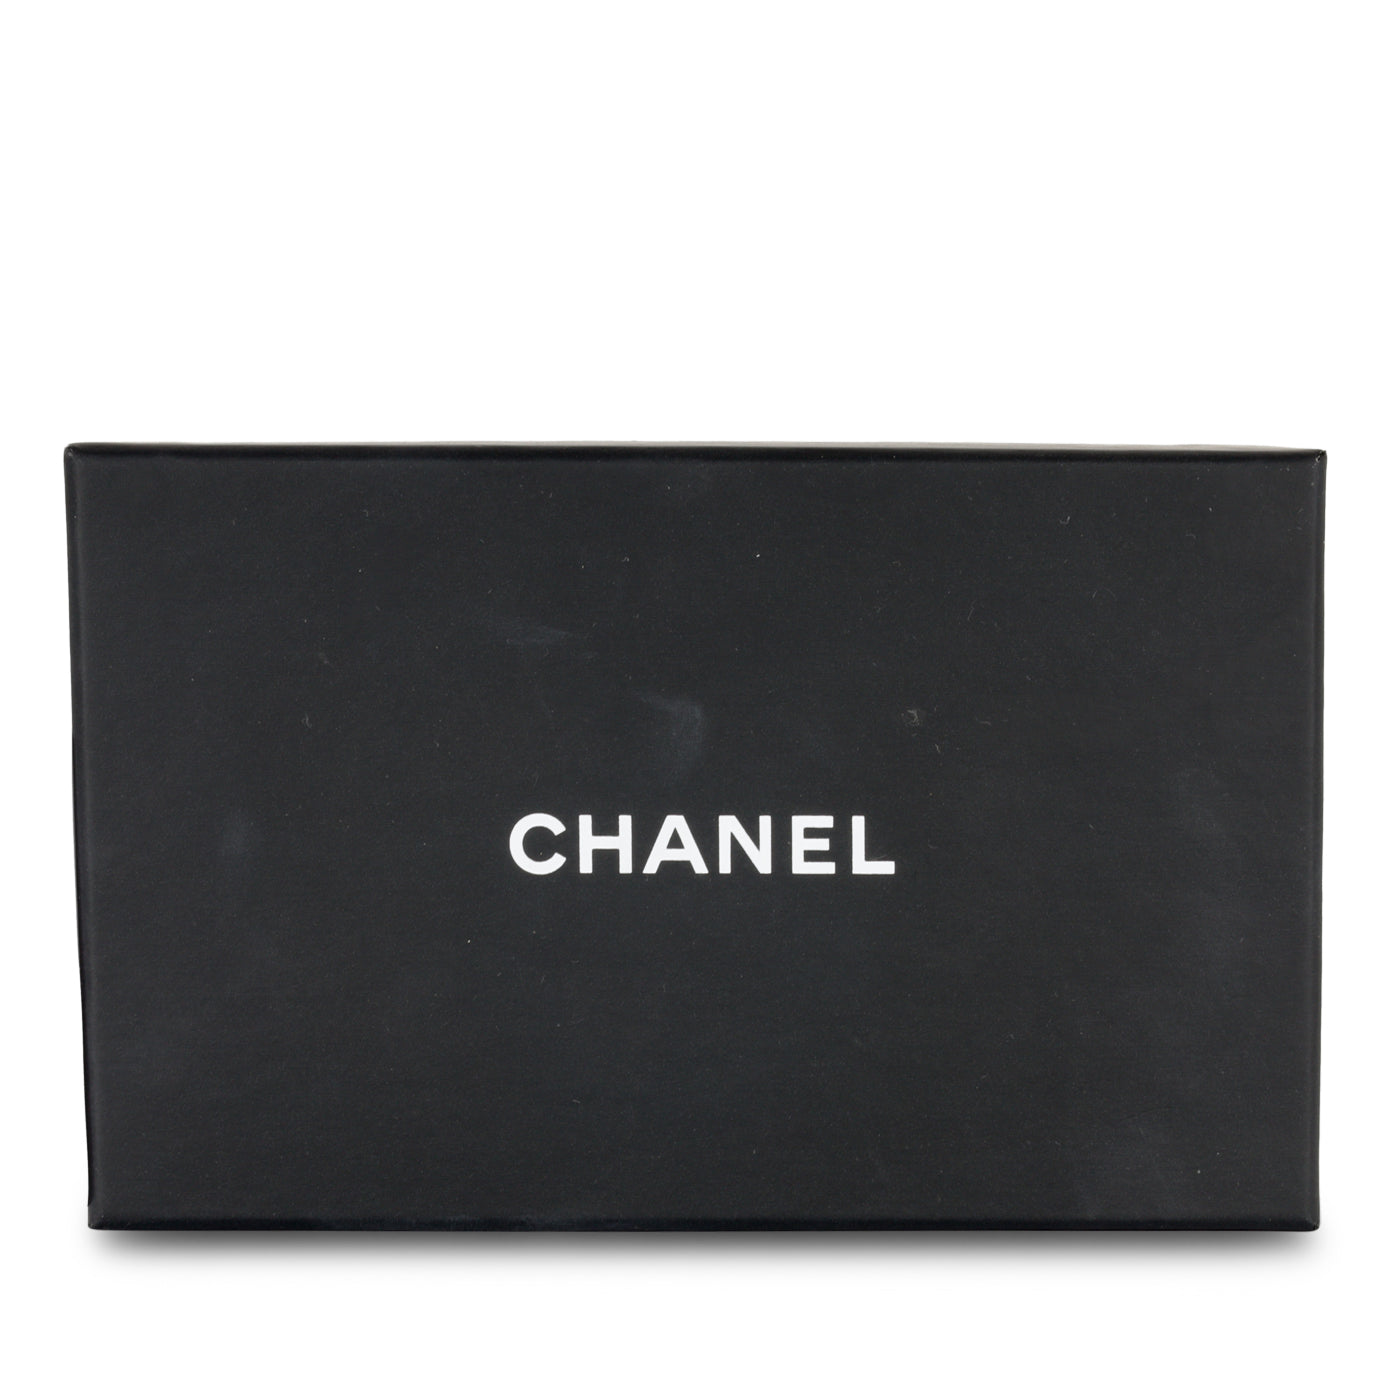 Chanel - Classic Zipped Card Holder - Black Caviar - CGHW - Excellent